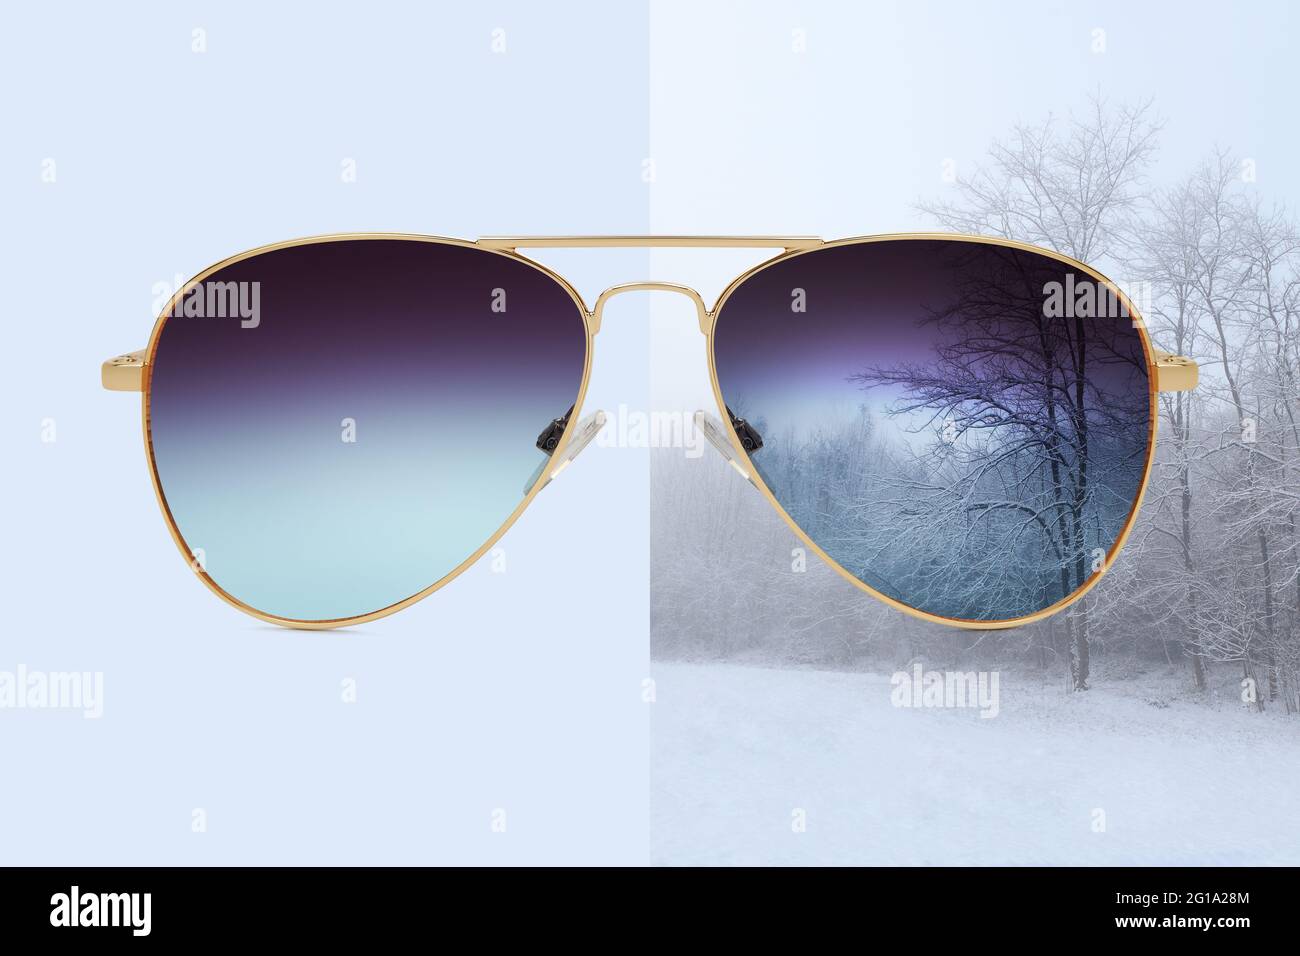 aviator sunglasses isolated on blue and winter background with snow covered trees, concept of polarized protective lenses Stock Photo